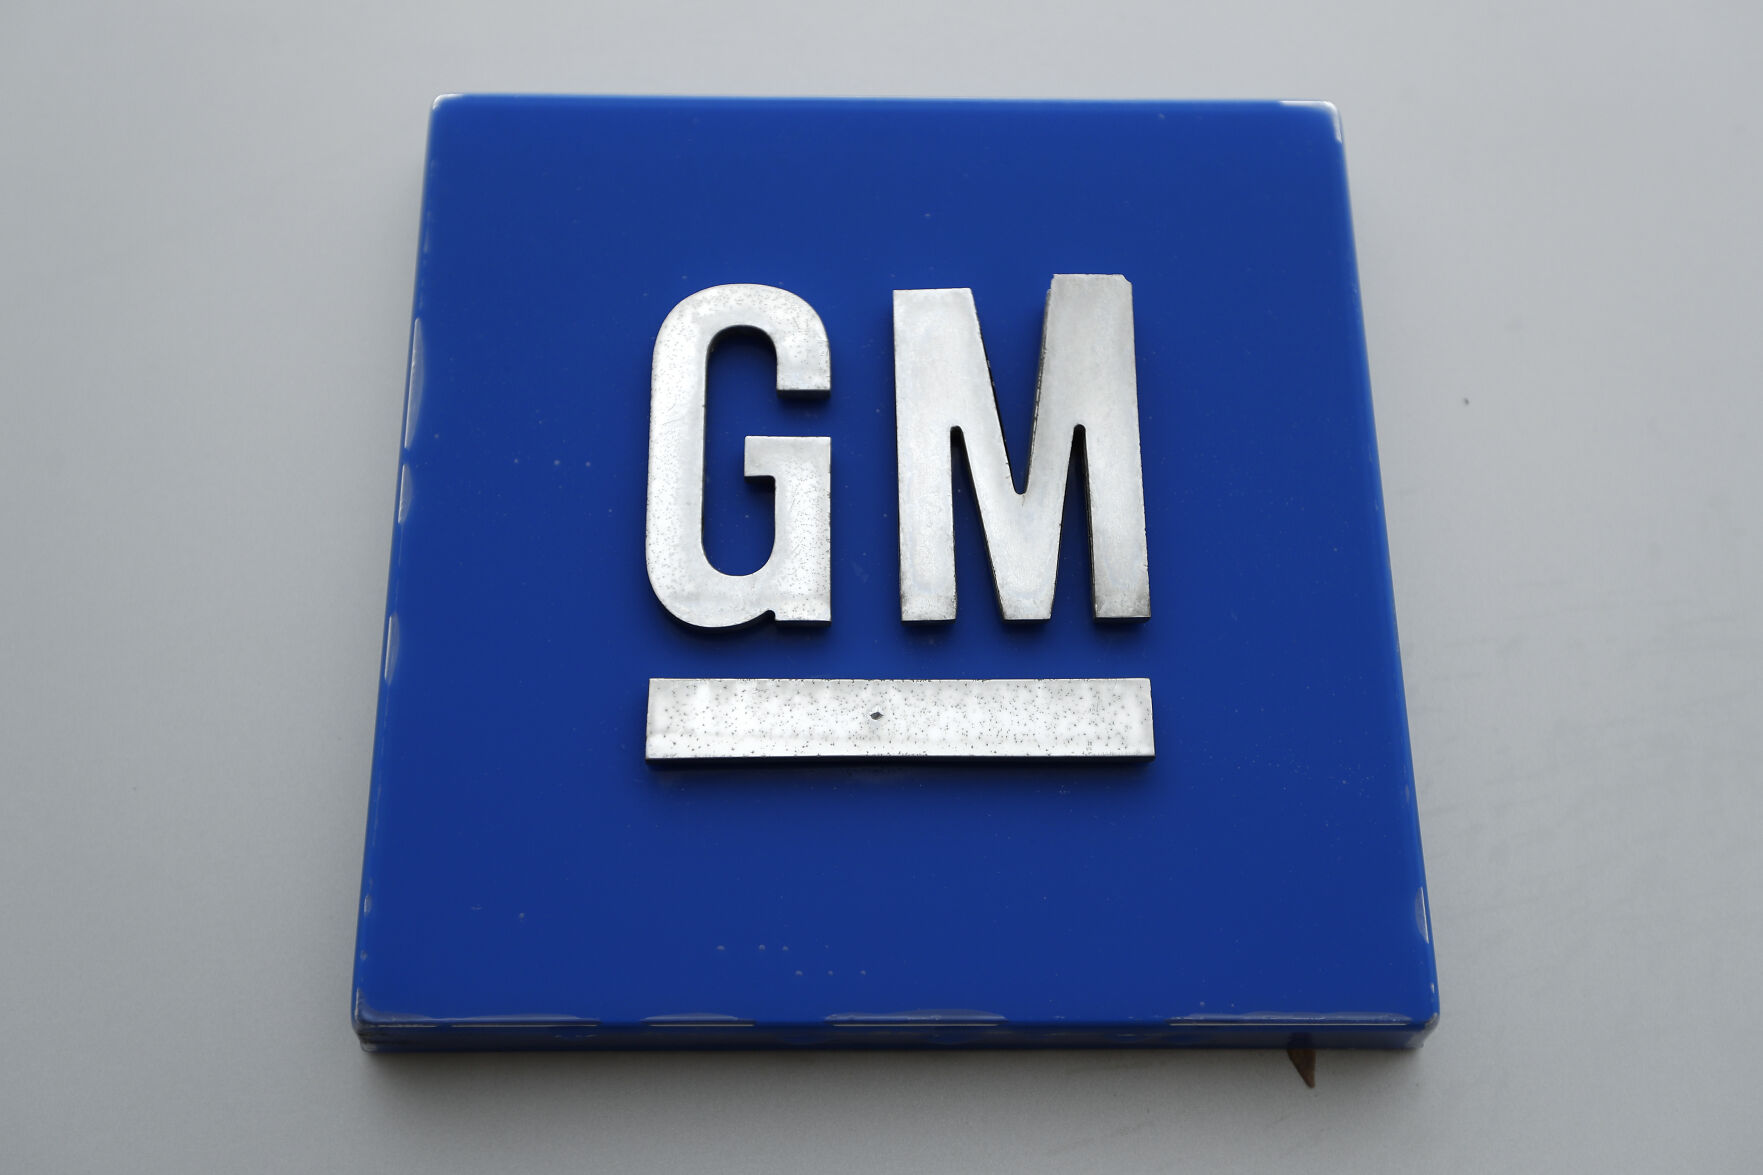 <p>FILE - A General Motors logo is displayed outside the General Motors Detroit-Hamtramck Assembly plant on Jan. 27, 2020, in Hamtramck, Mich. General Motors is making some performance-related job cuts, Wednesday, March 1, 2023, among some of its salaried employees and executives. The Detroit automaker did not specify how many jobs would be eliminated, but did say it would impact a relatively small number of workers. (AP Photo/Paul Sancya, File)</p>   PHOTO CREDIT: Paul Sancya 